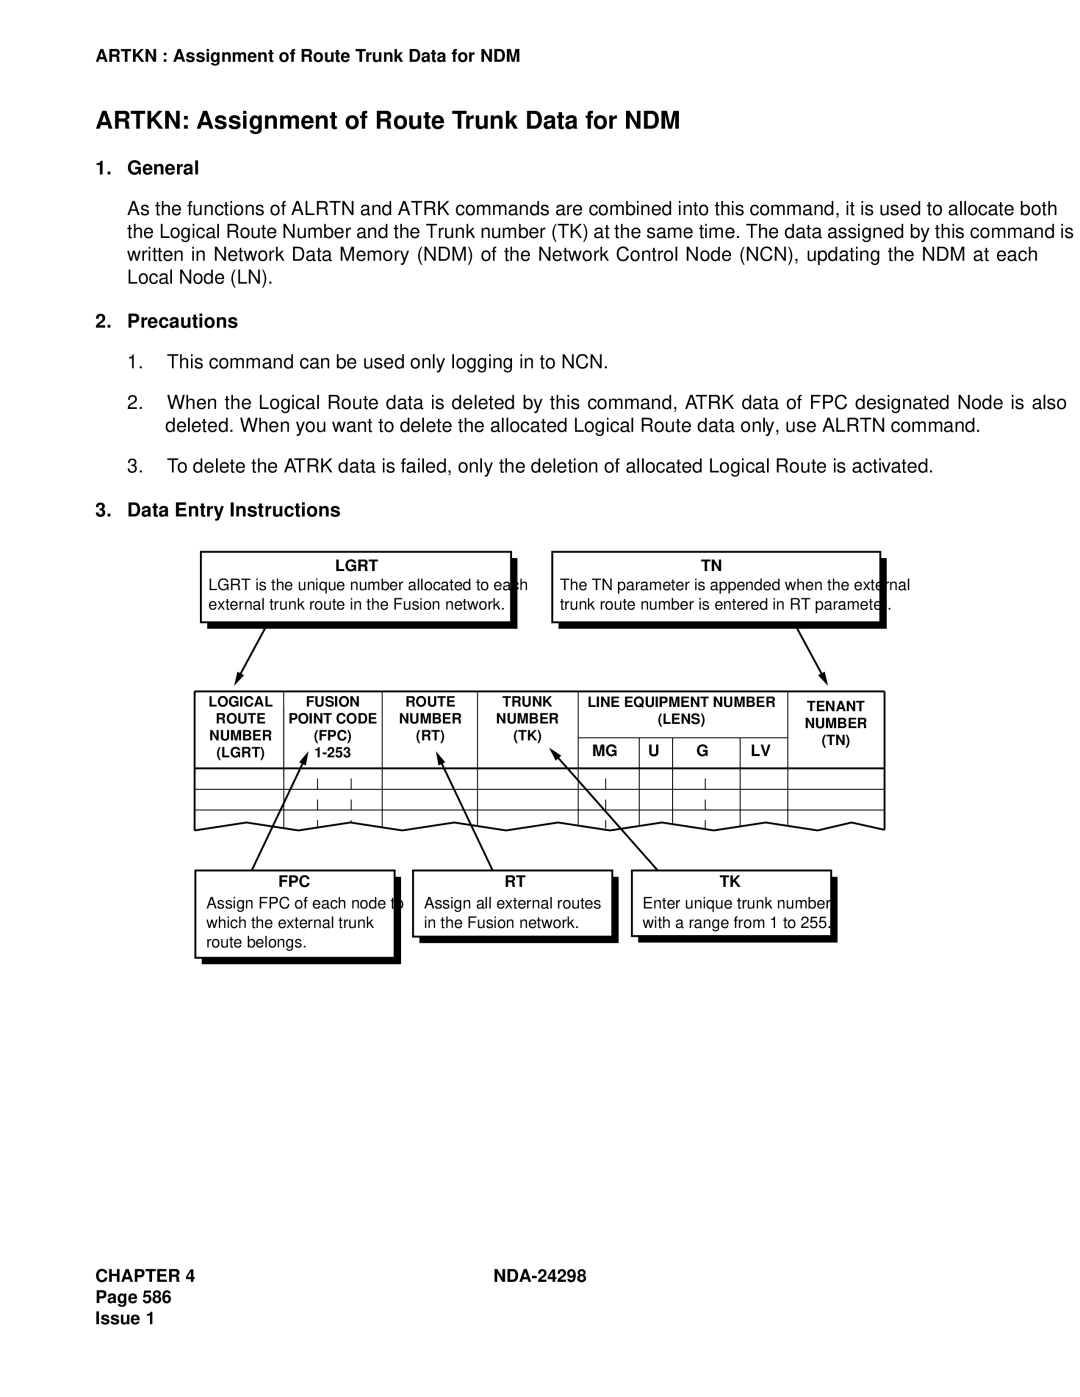 NEC NDA-24298 manual Artkn Assignment of Route Trunk Data for NDM 